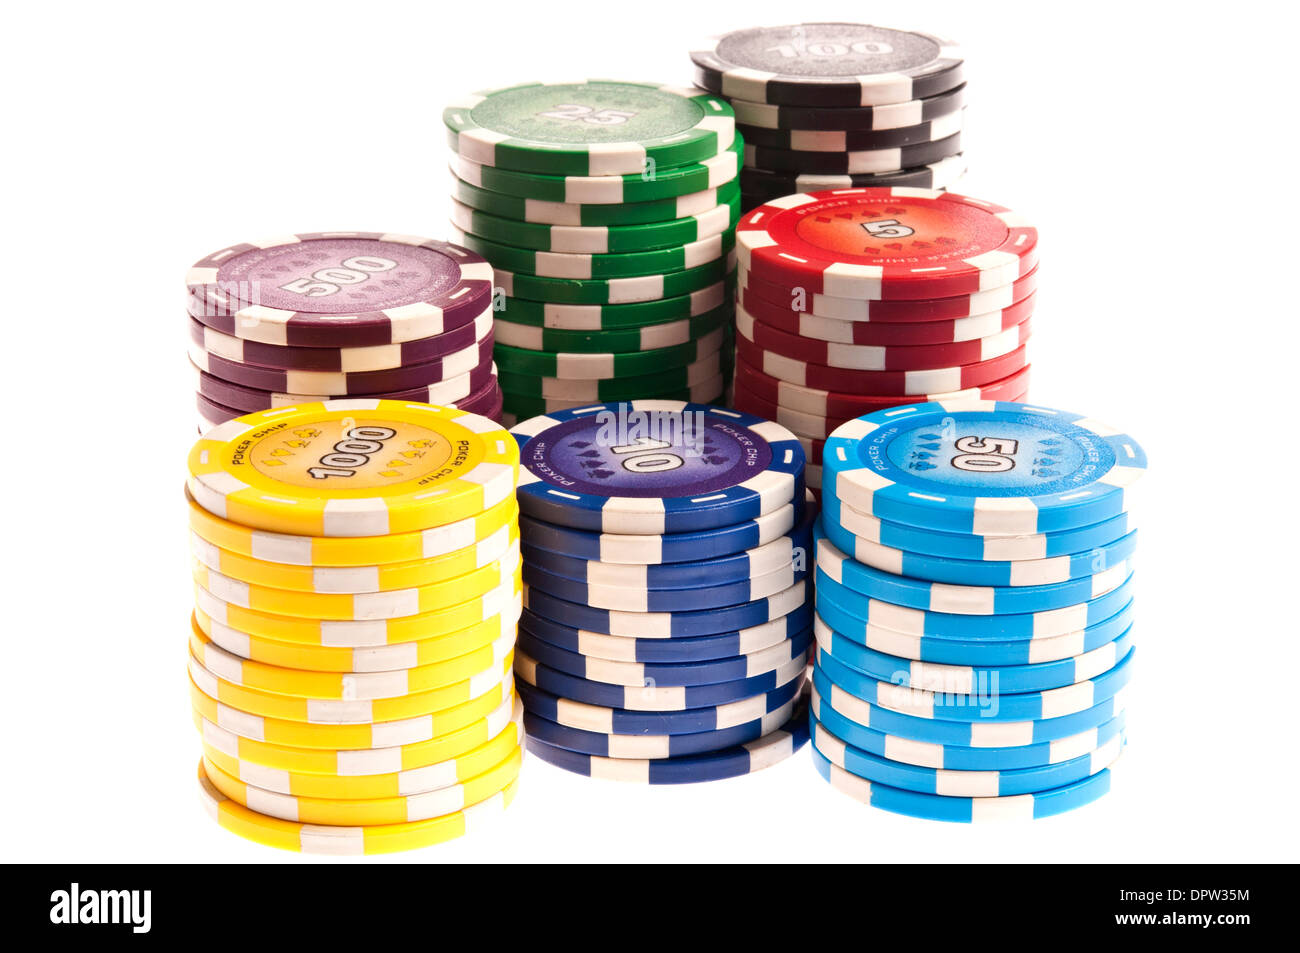 stacked poker chips Stock Photo - Alamy